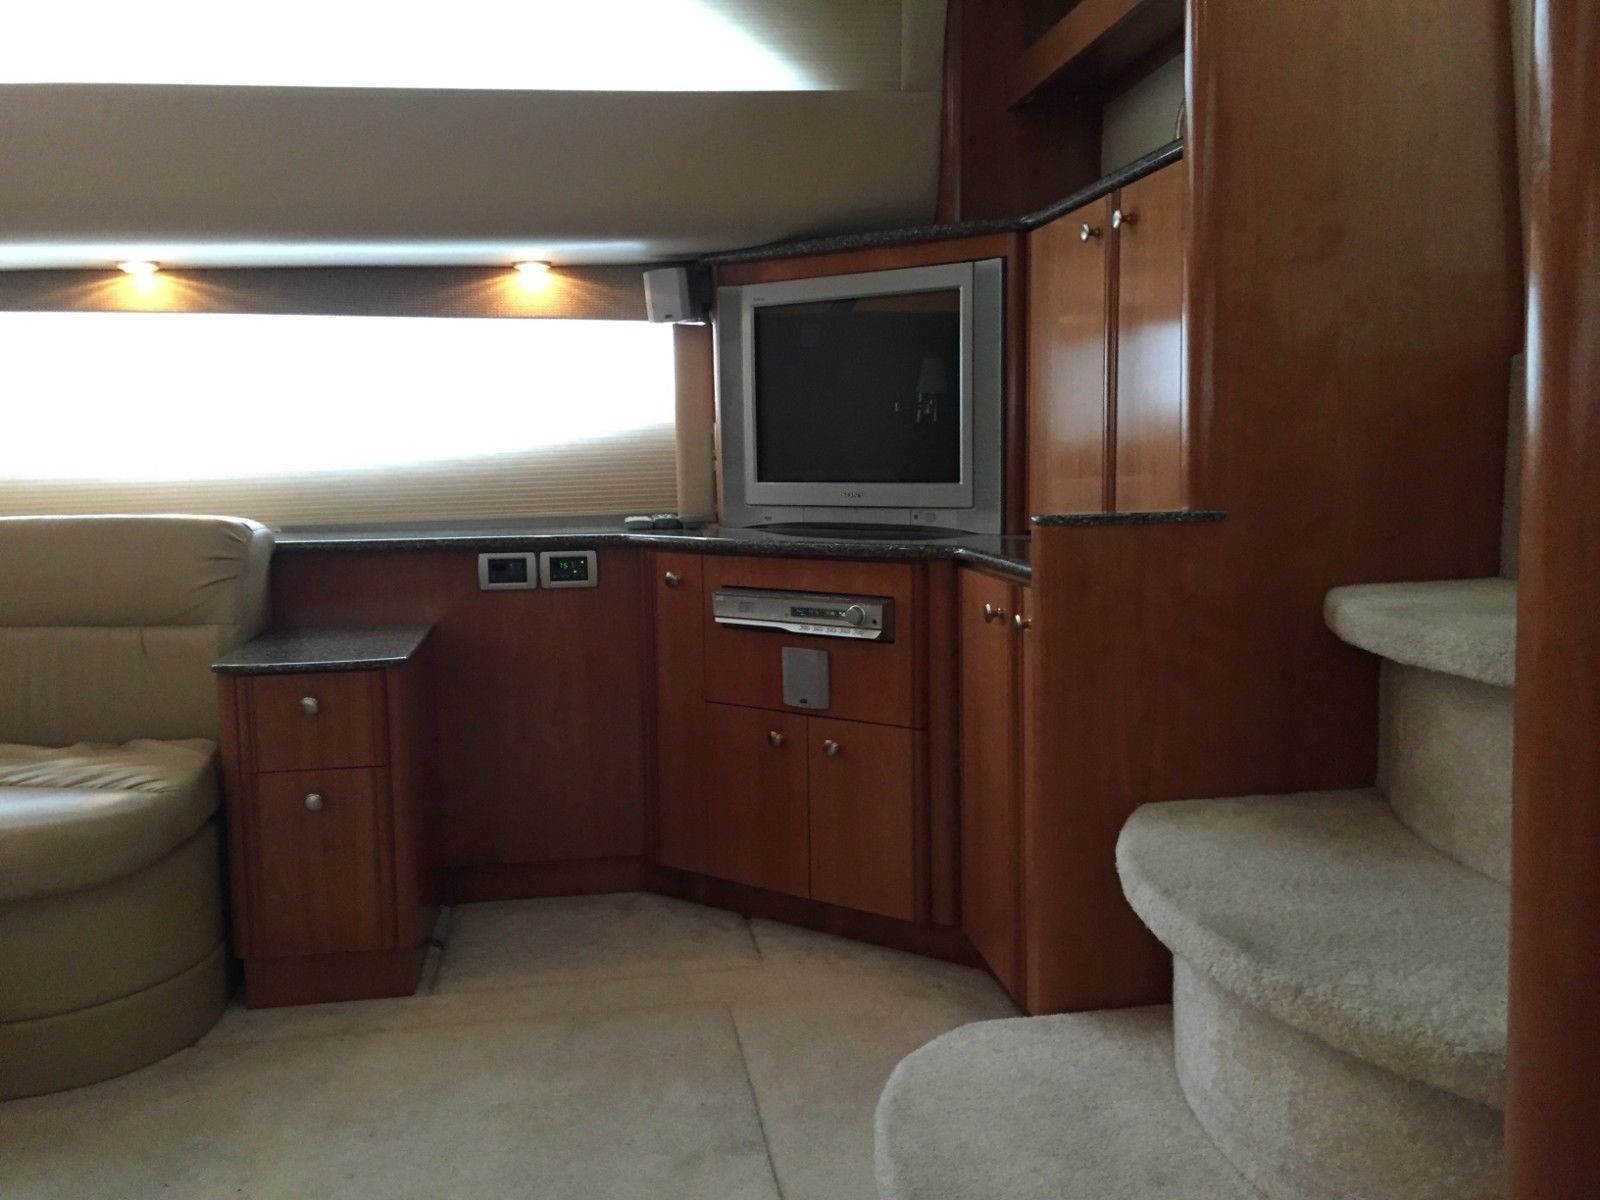 Meridian 408 2004 for sale for $146,000 - Boats-from-USA.com